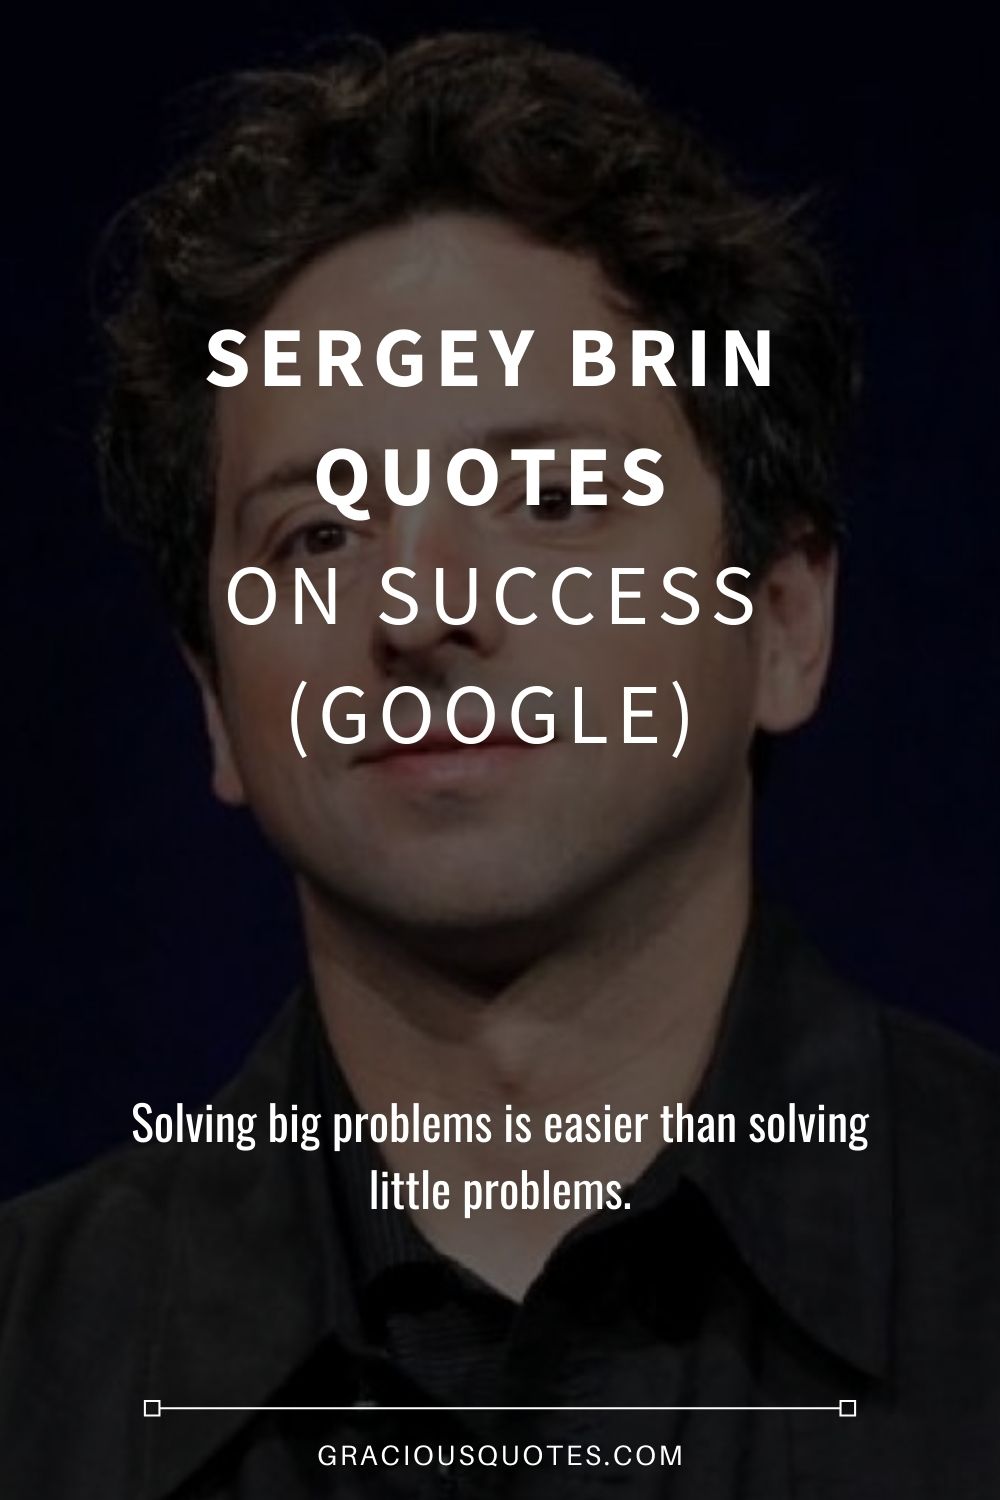 Sergey Brin Quotes on Success (GOOGLE) - Gracious Quotes